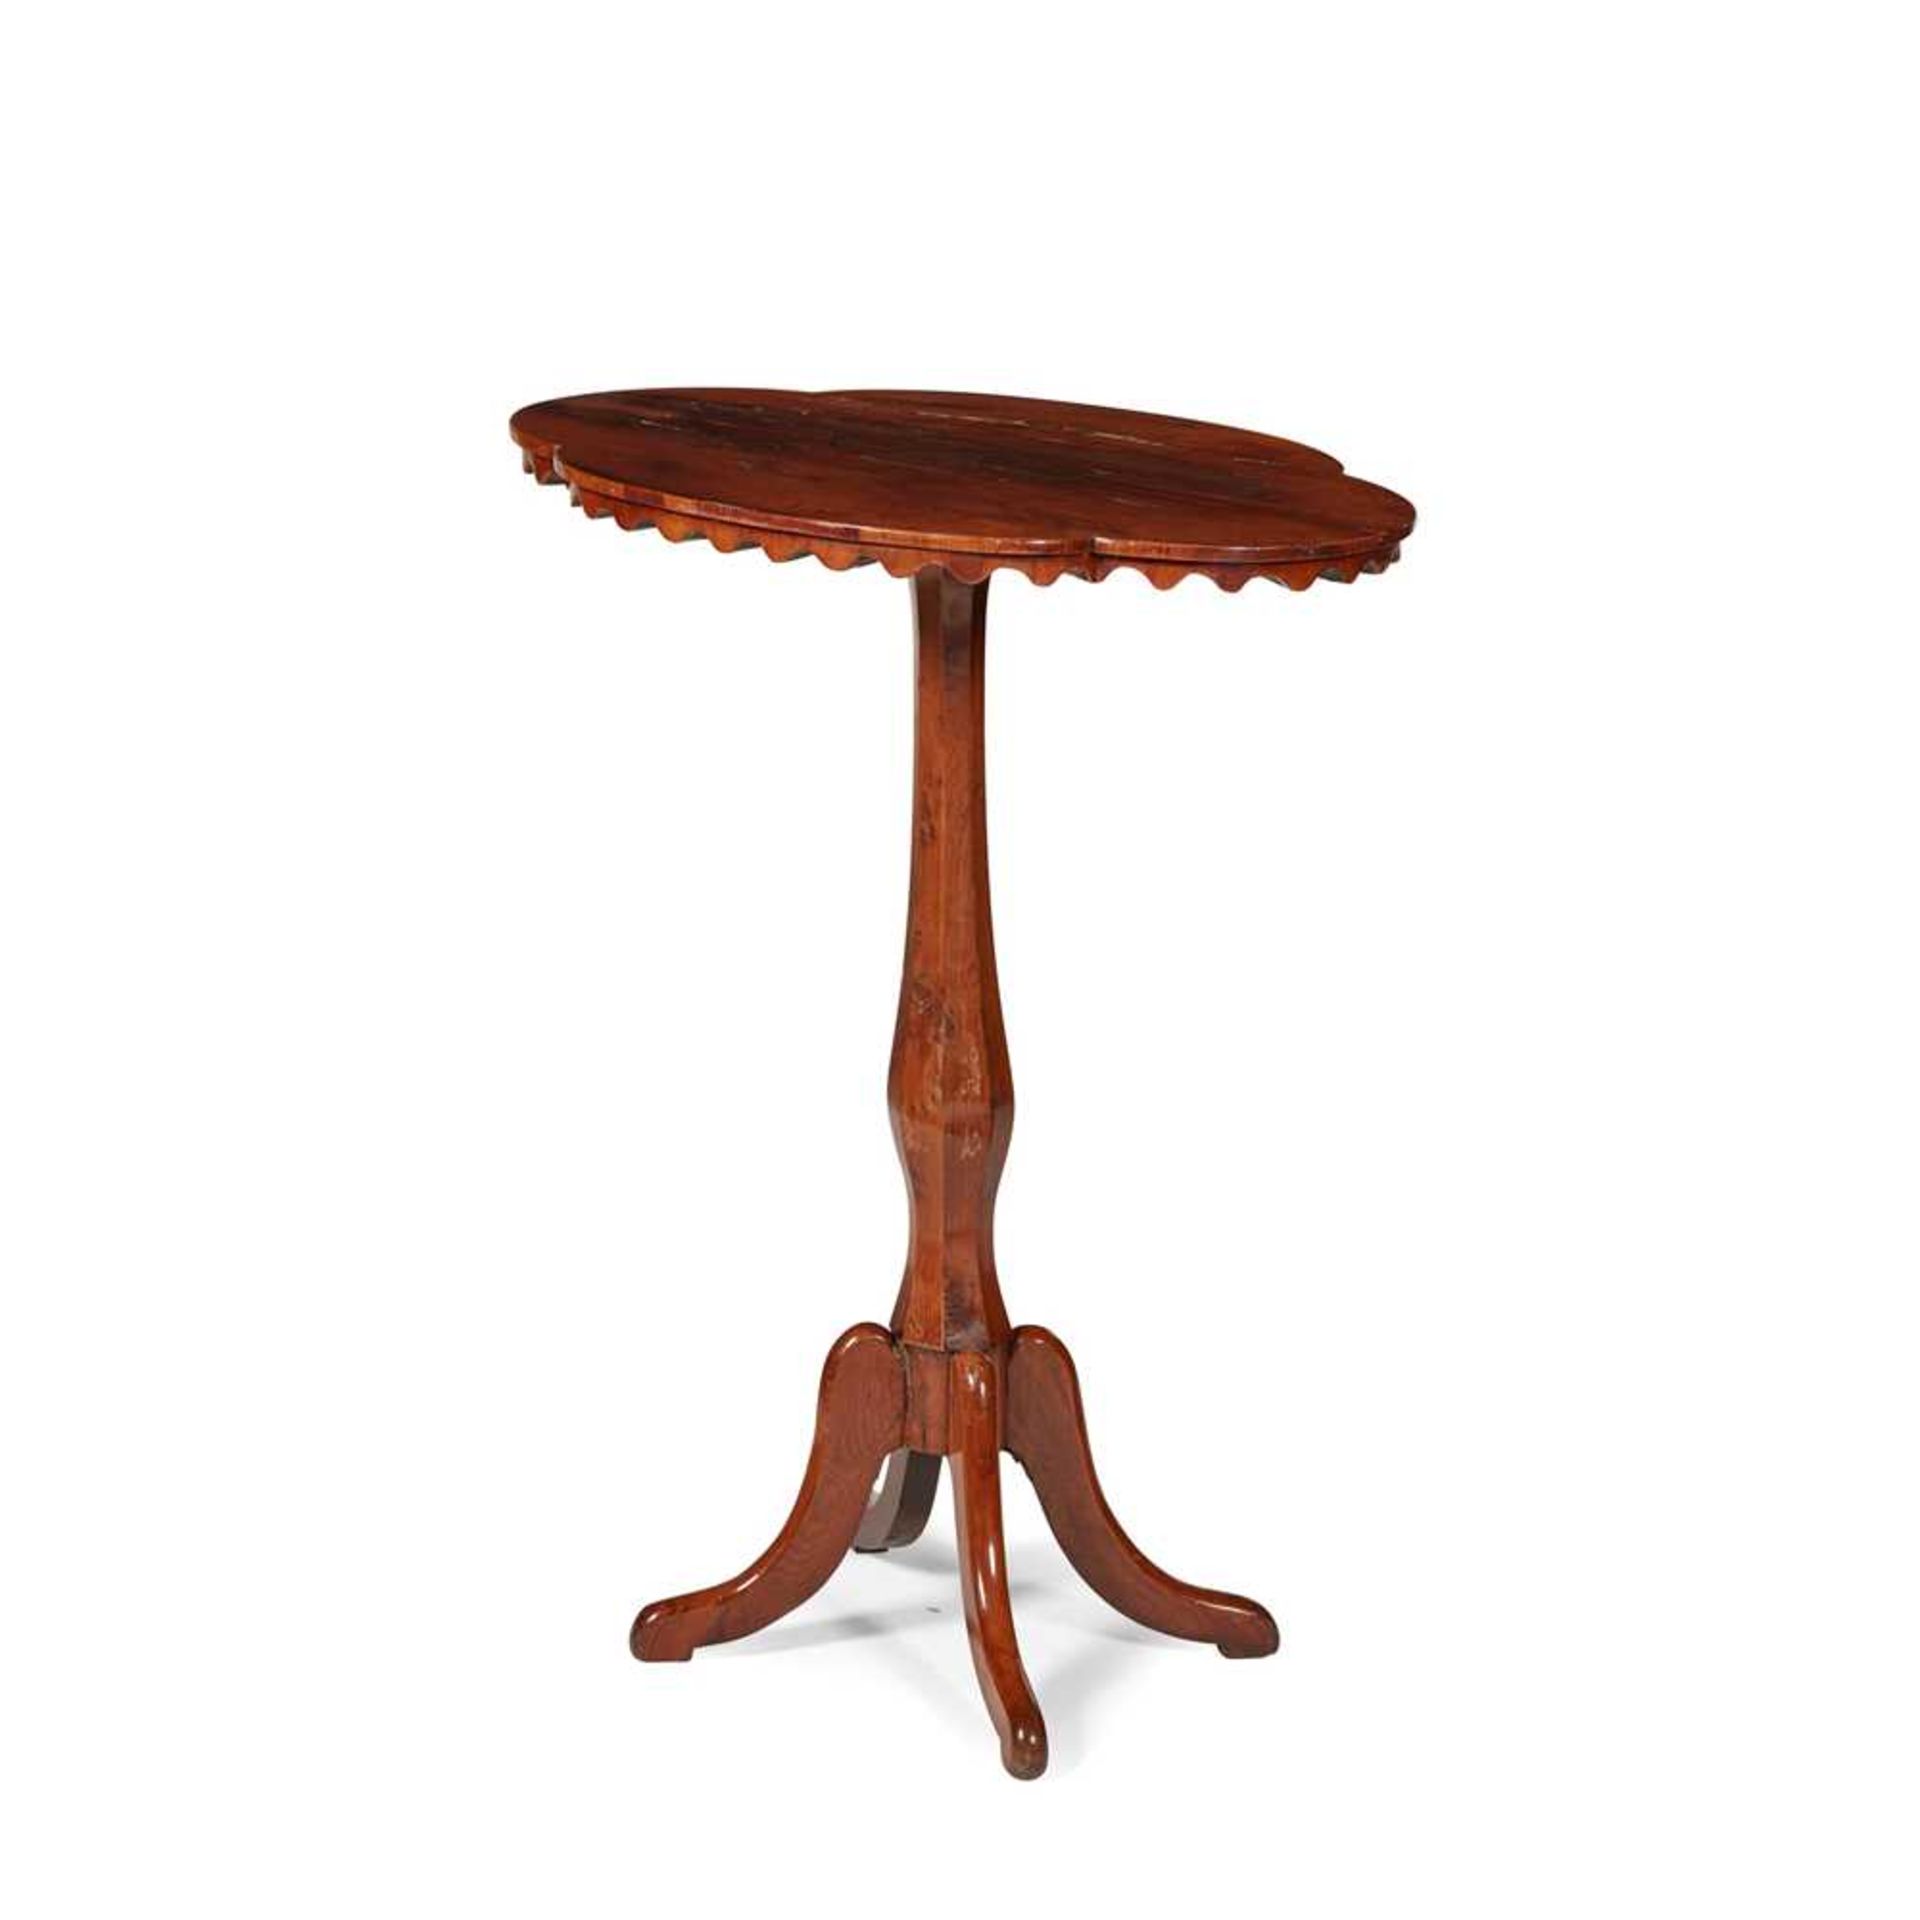 PROVINCIAL YEW WOOD OCCASIONAL TABLE EARLY 19TH CENTURY